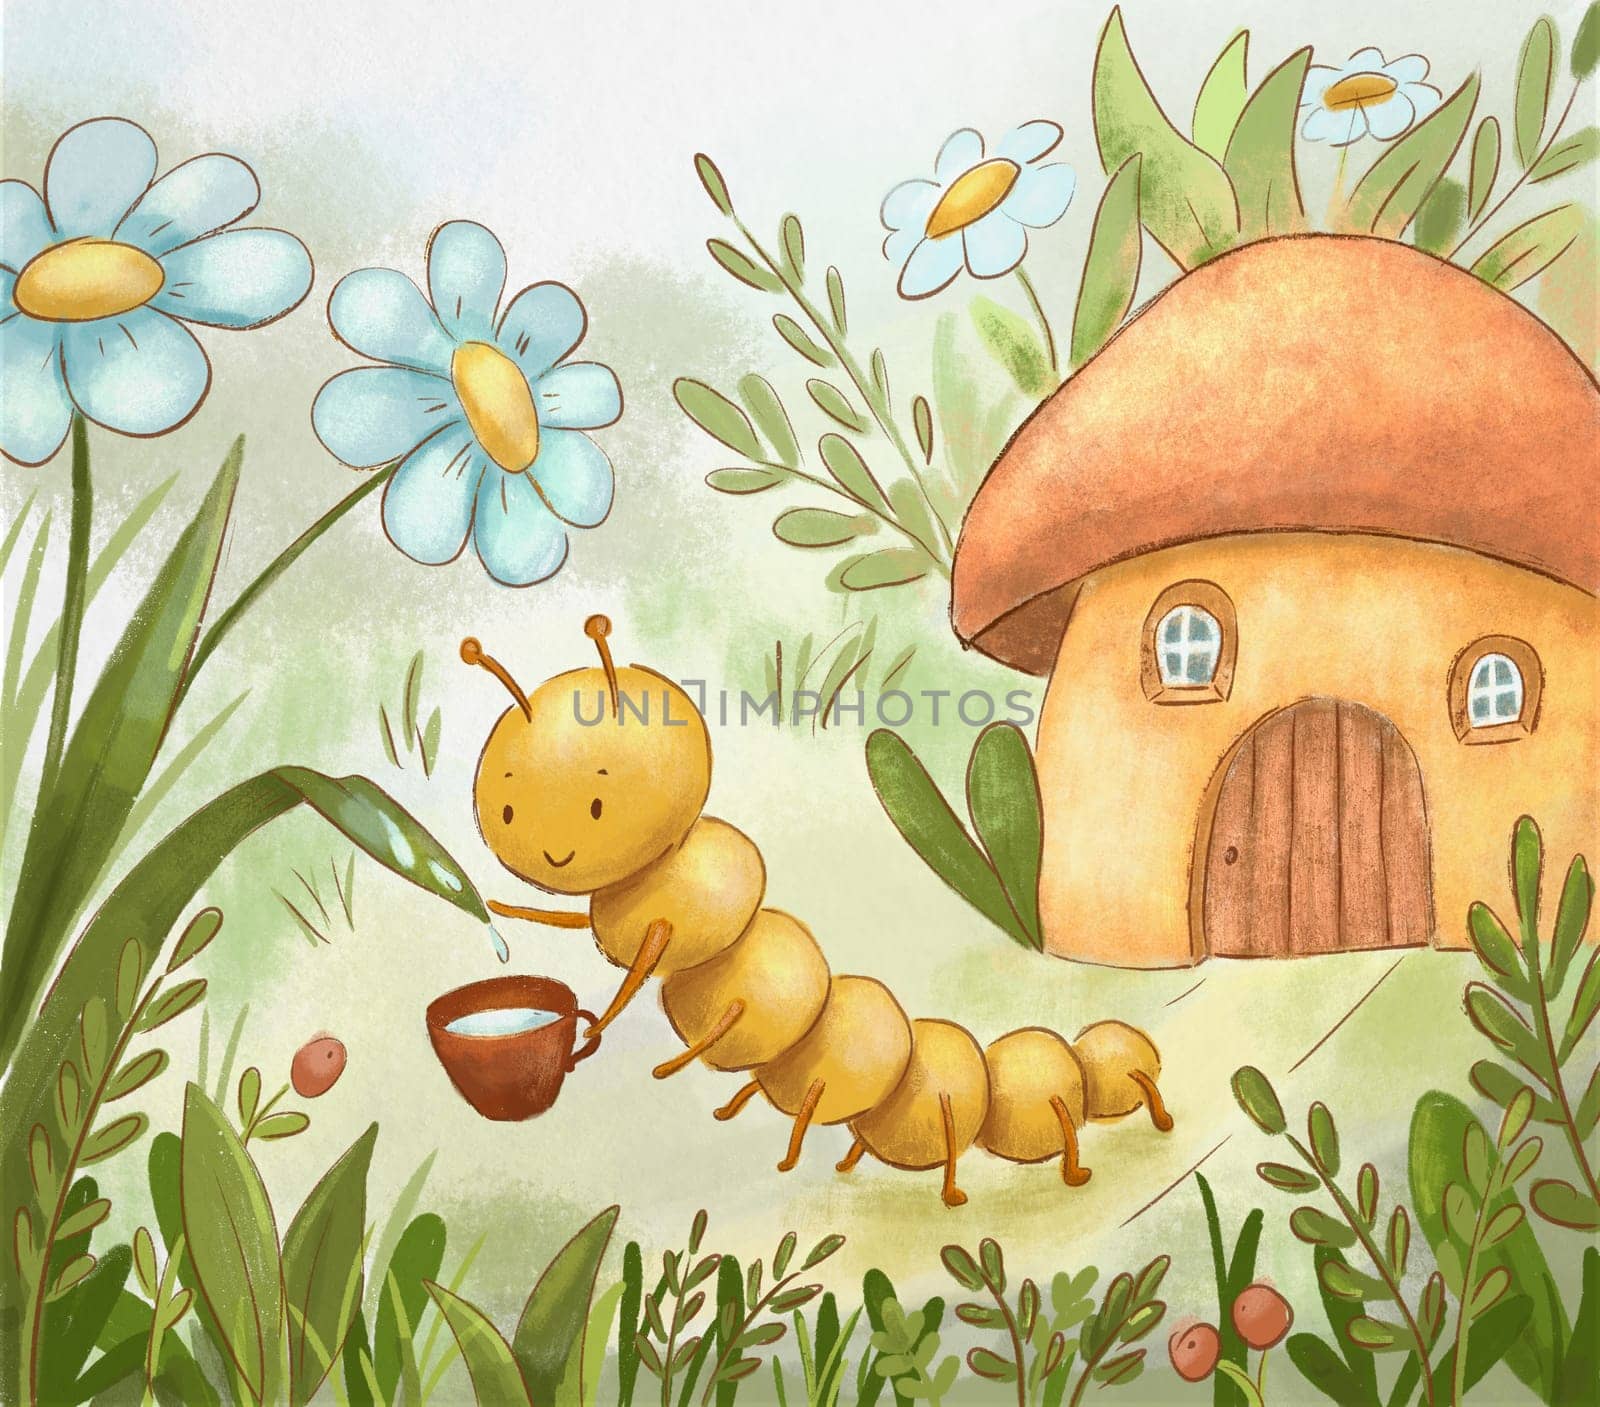 Cute yellow caterpillar pours dew from flower next to house in grass. Childish book illustration, poster and postcard